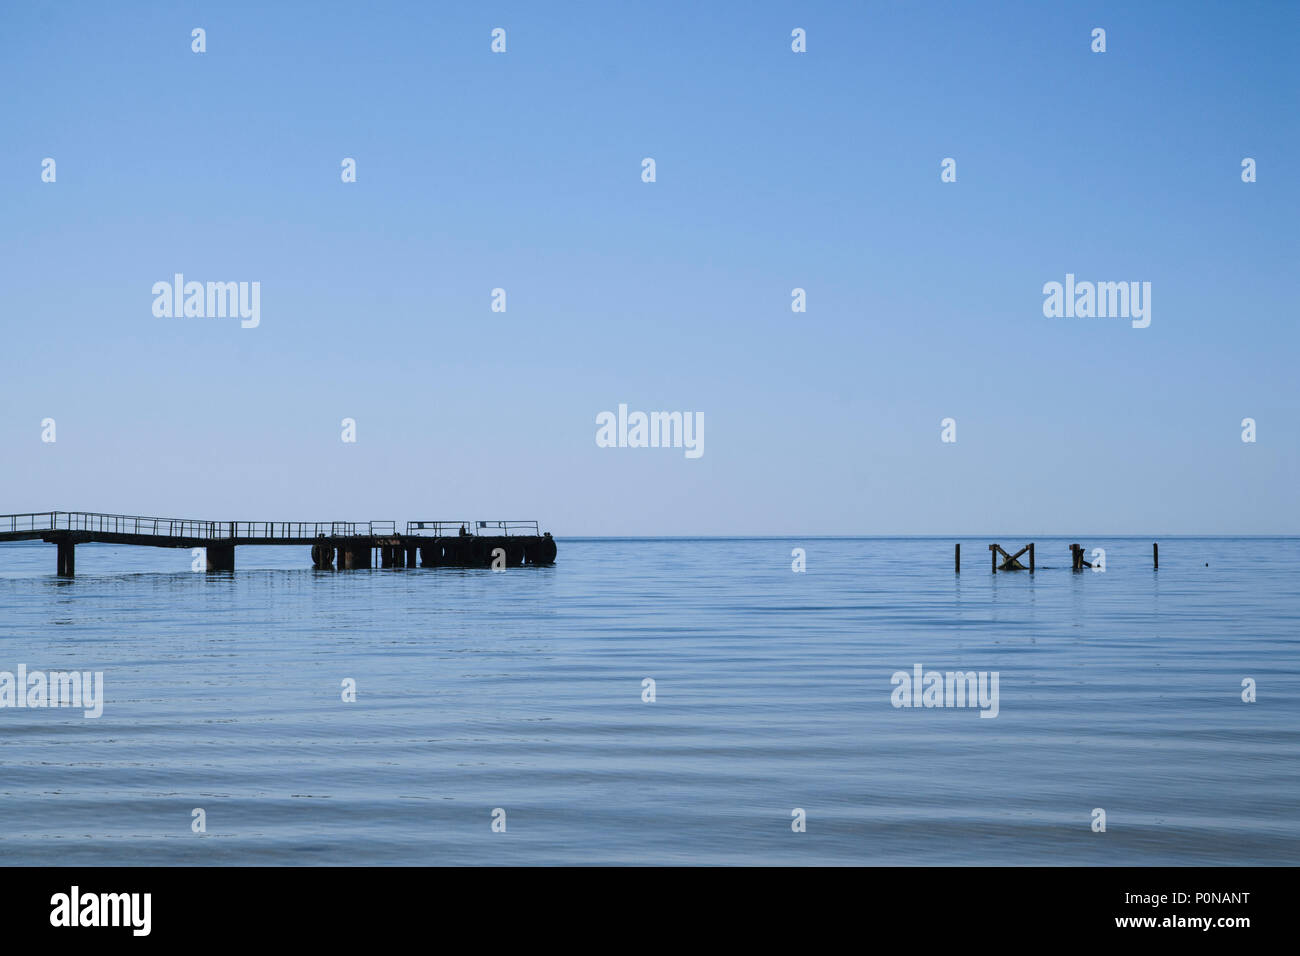 Blue sea. Blue sky. Some architectural objects in the water. Calm and minimalism composition Stock Photo